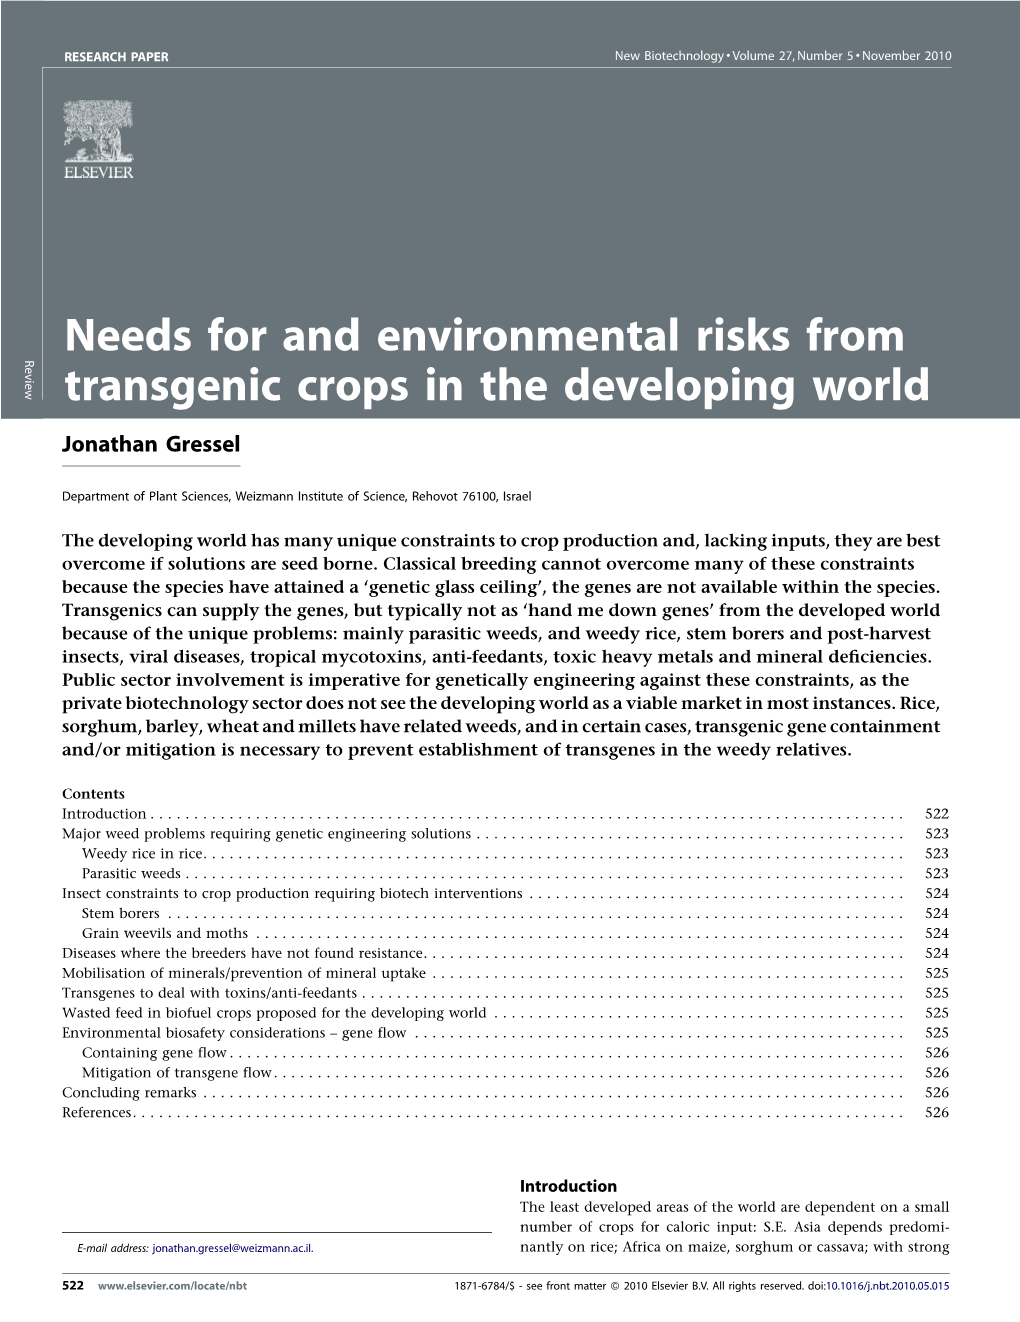 Needs for and Environmental Risks from Transgenic Crops in The